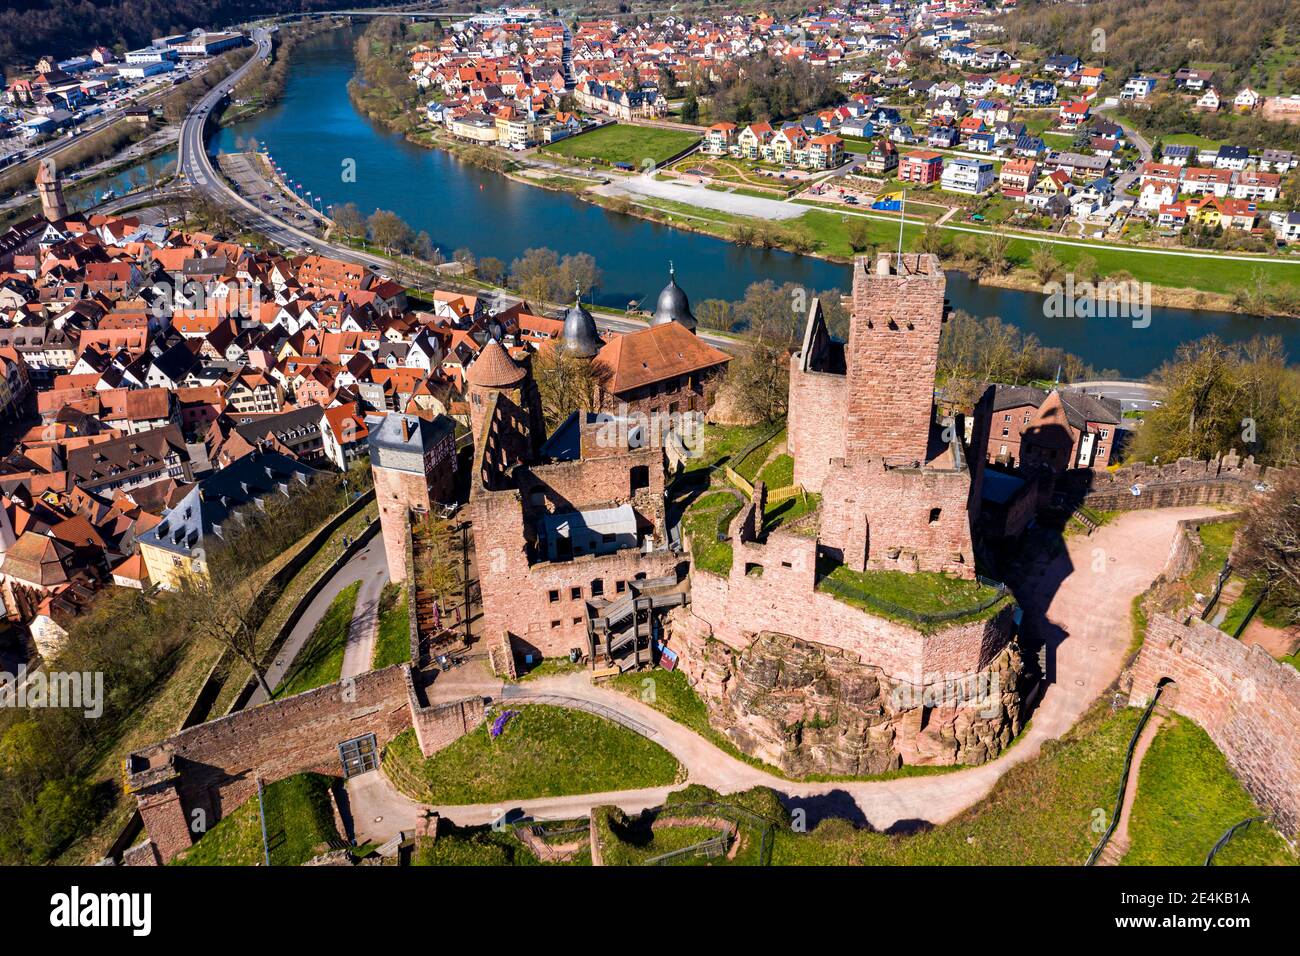 Germany, Baden-Wurttemberg, Wertheim am Main, Helicopter view of Wertheim Castle and surrounding town in summer Stock Photo